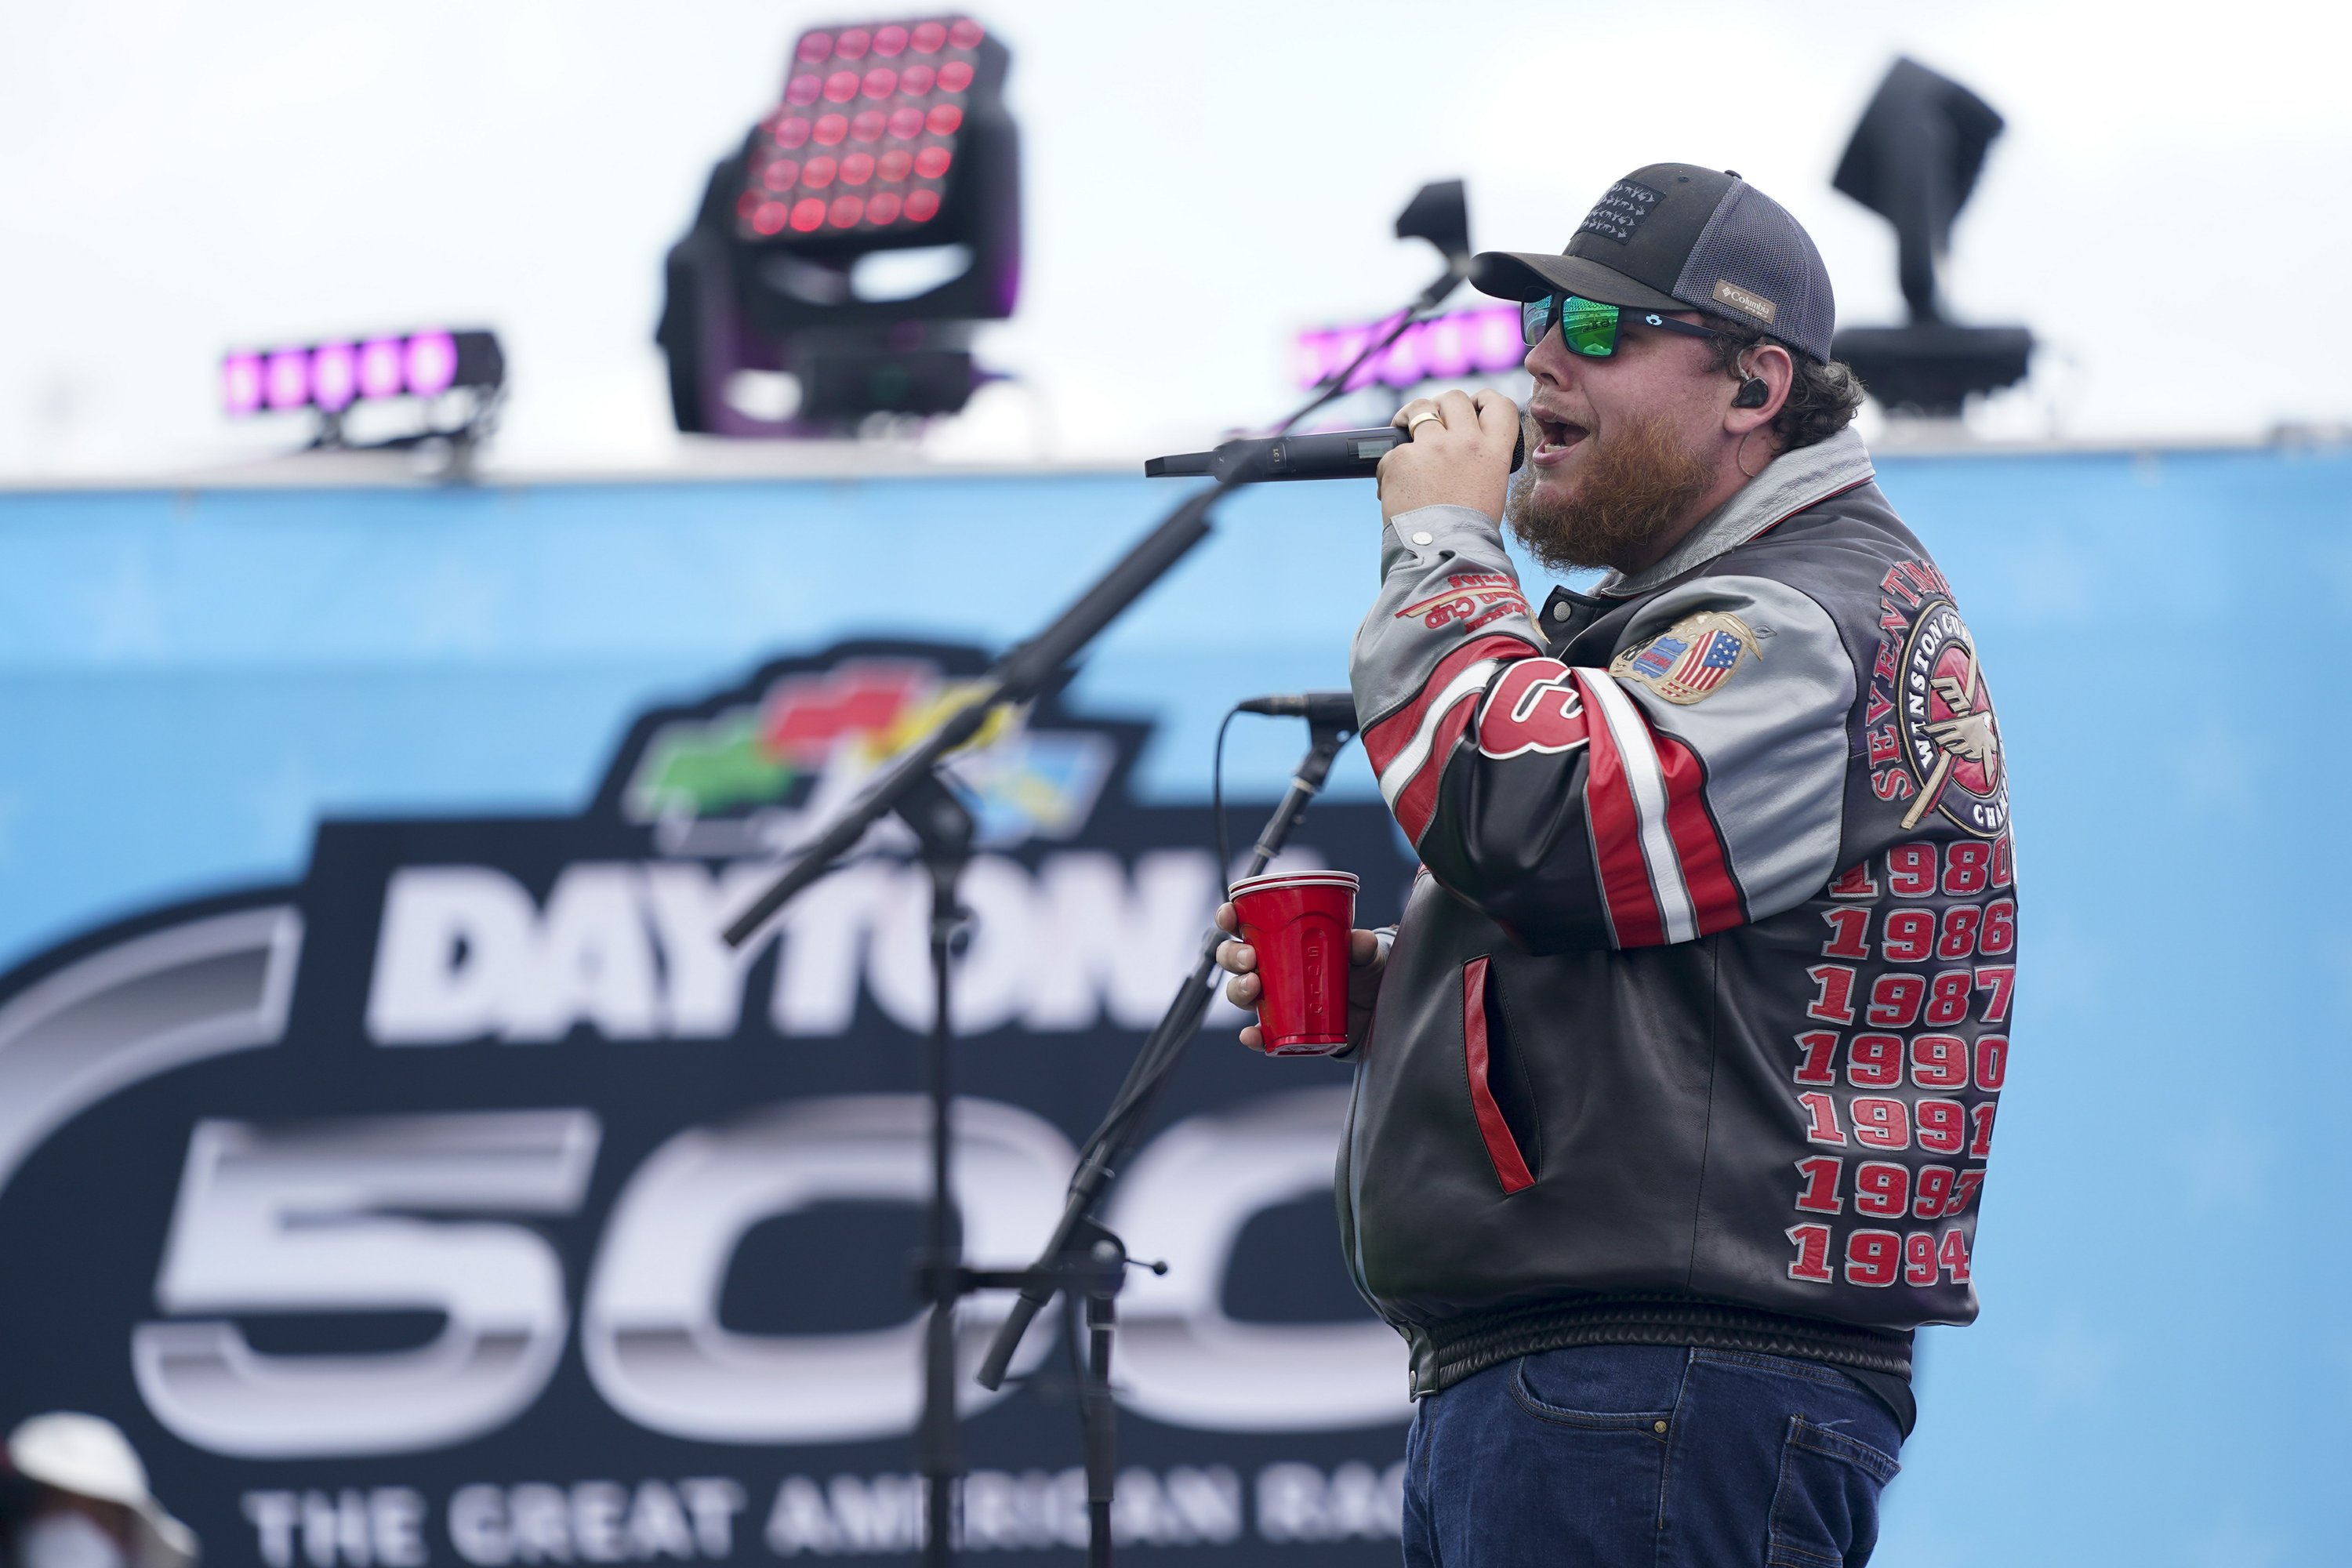 Luke Combs apologizes for the images of the Confederate flag